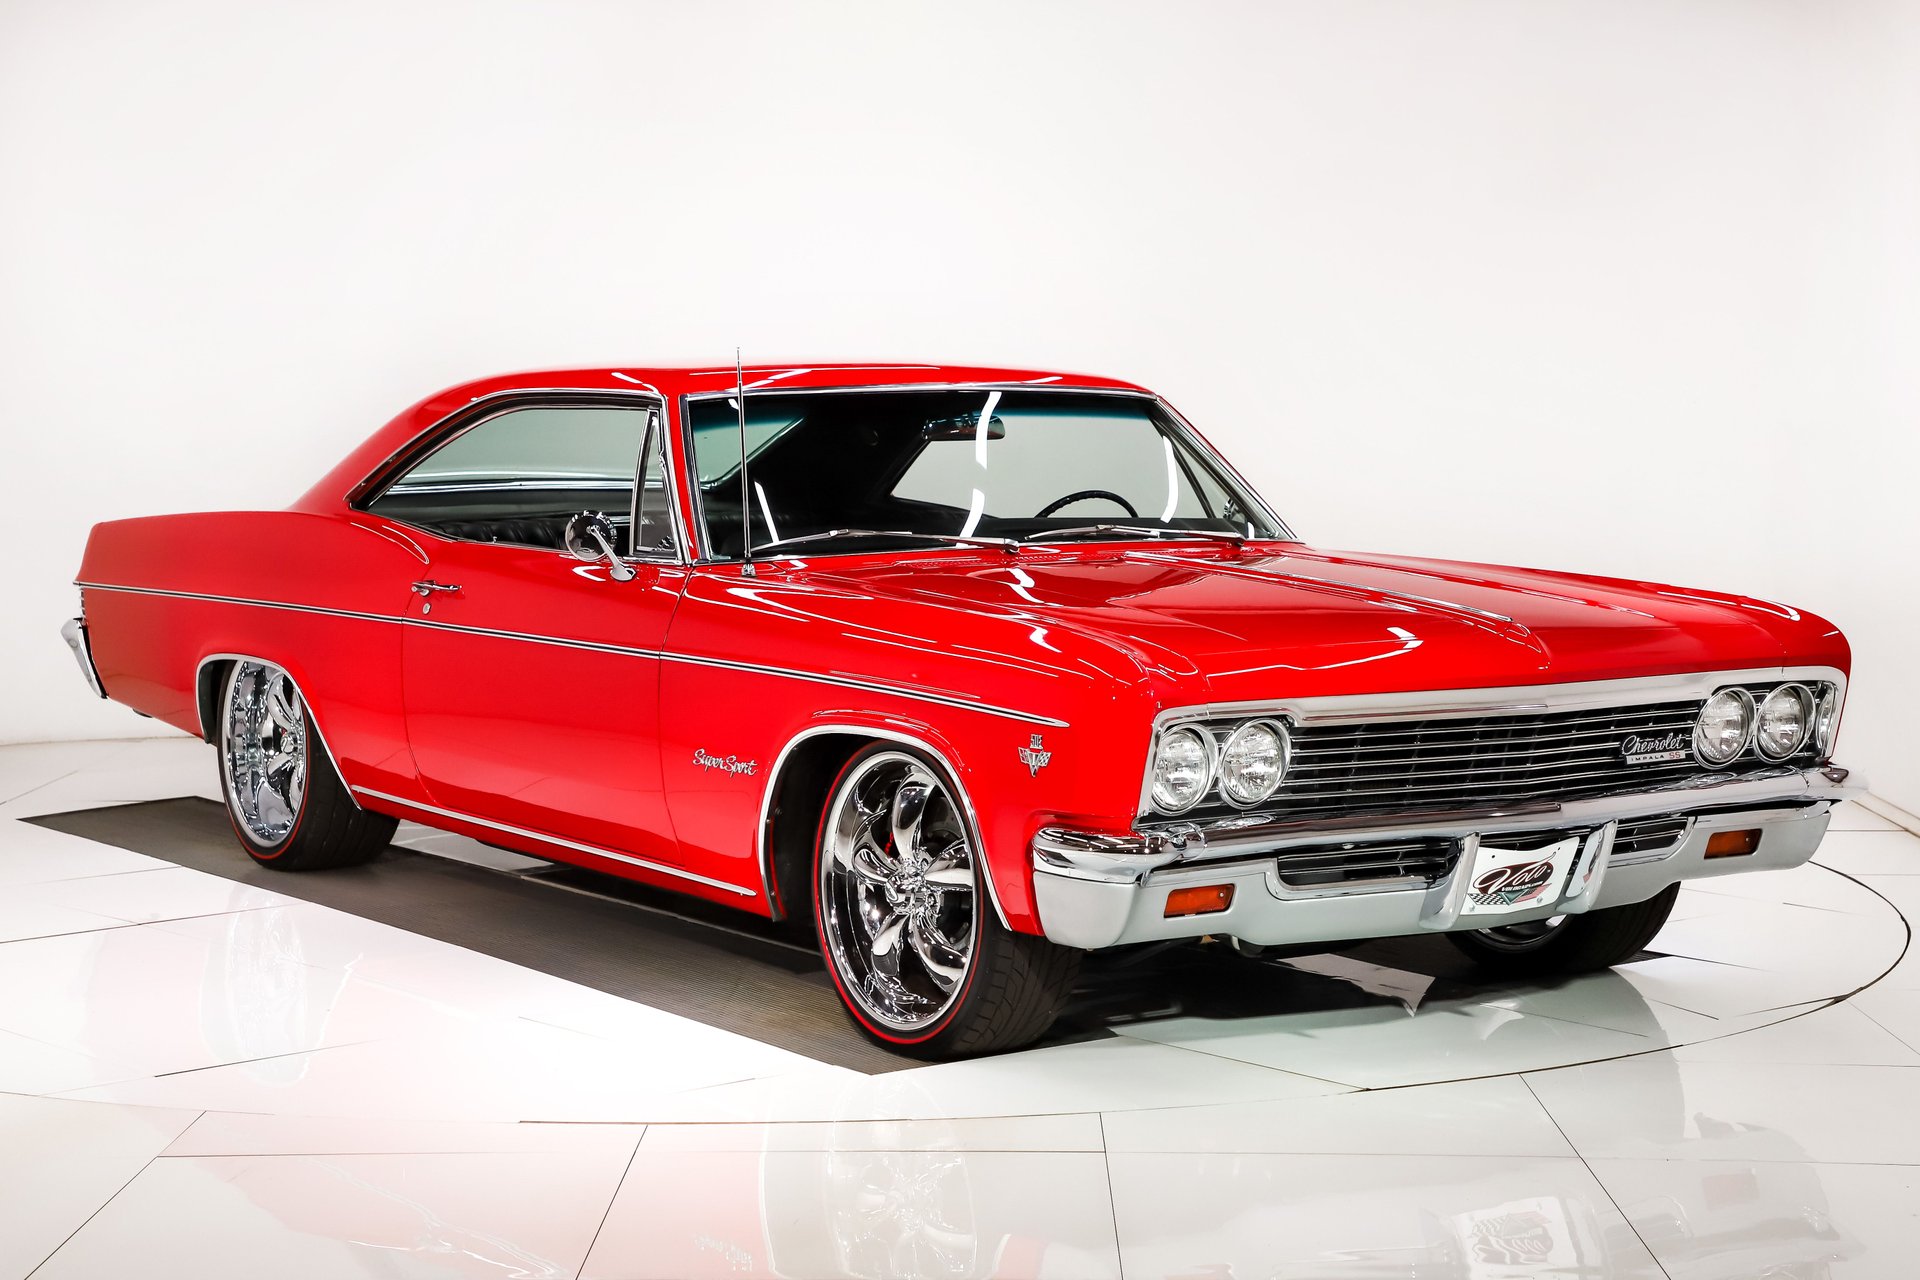 Unveiling a Spectacular Red Hot 1966 Chevrolet Impala SS